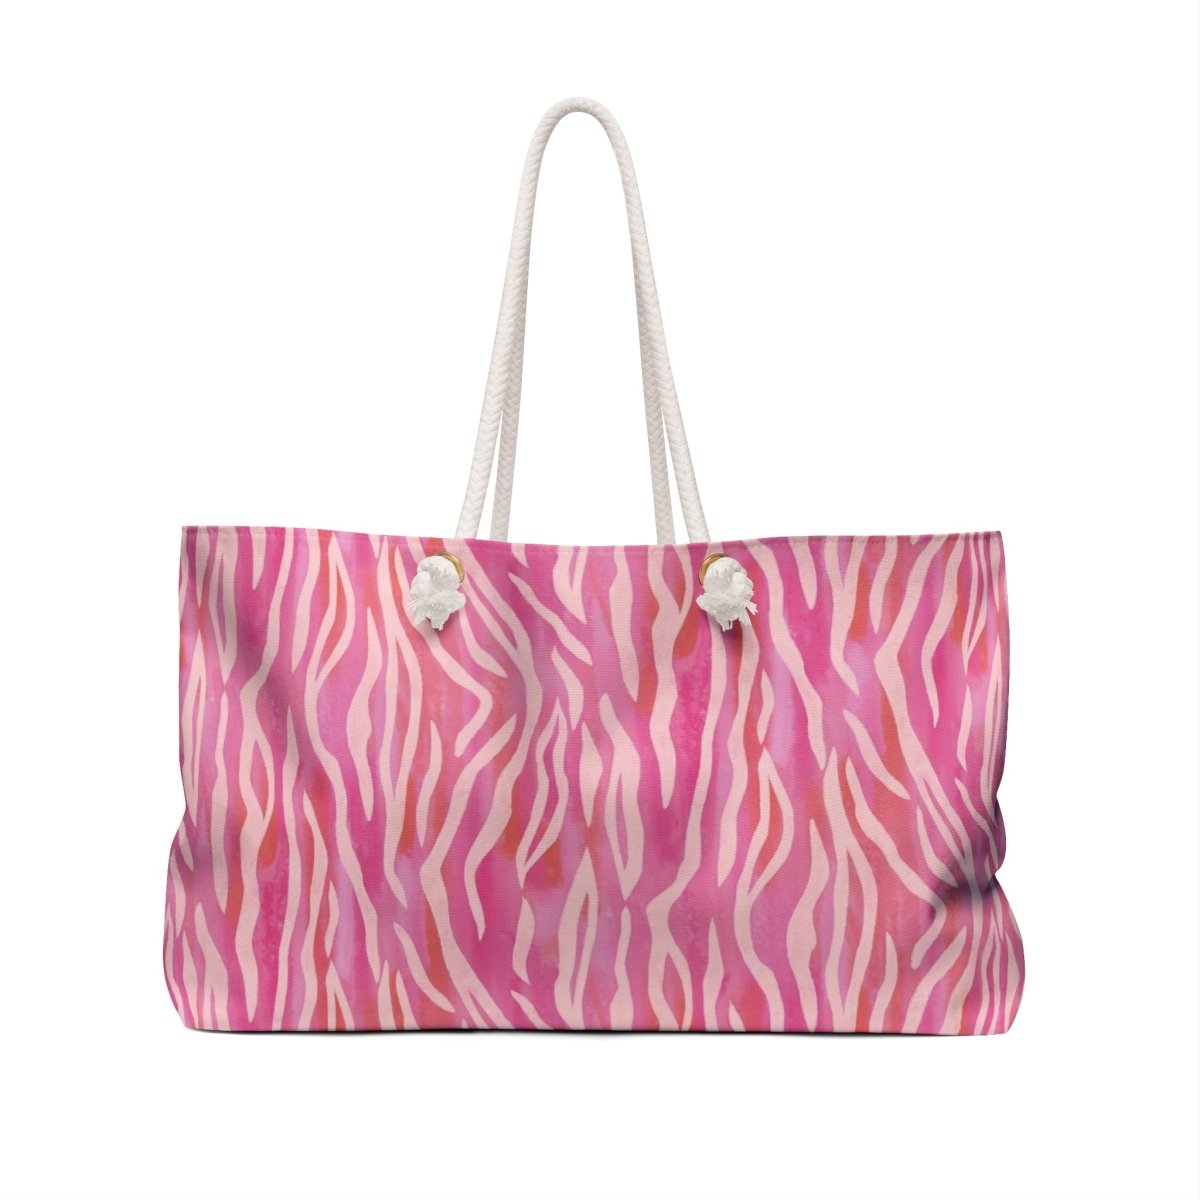 Extra Large Tote Bag in Pink Tiger Stripes - Not in the Kitchen